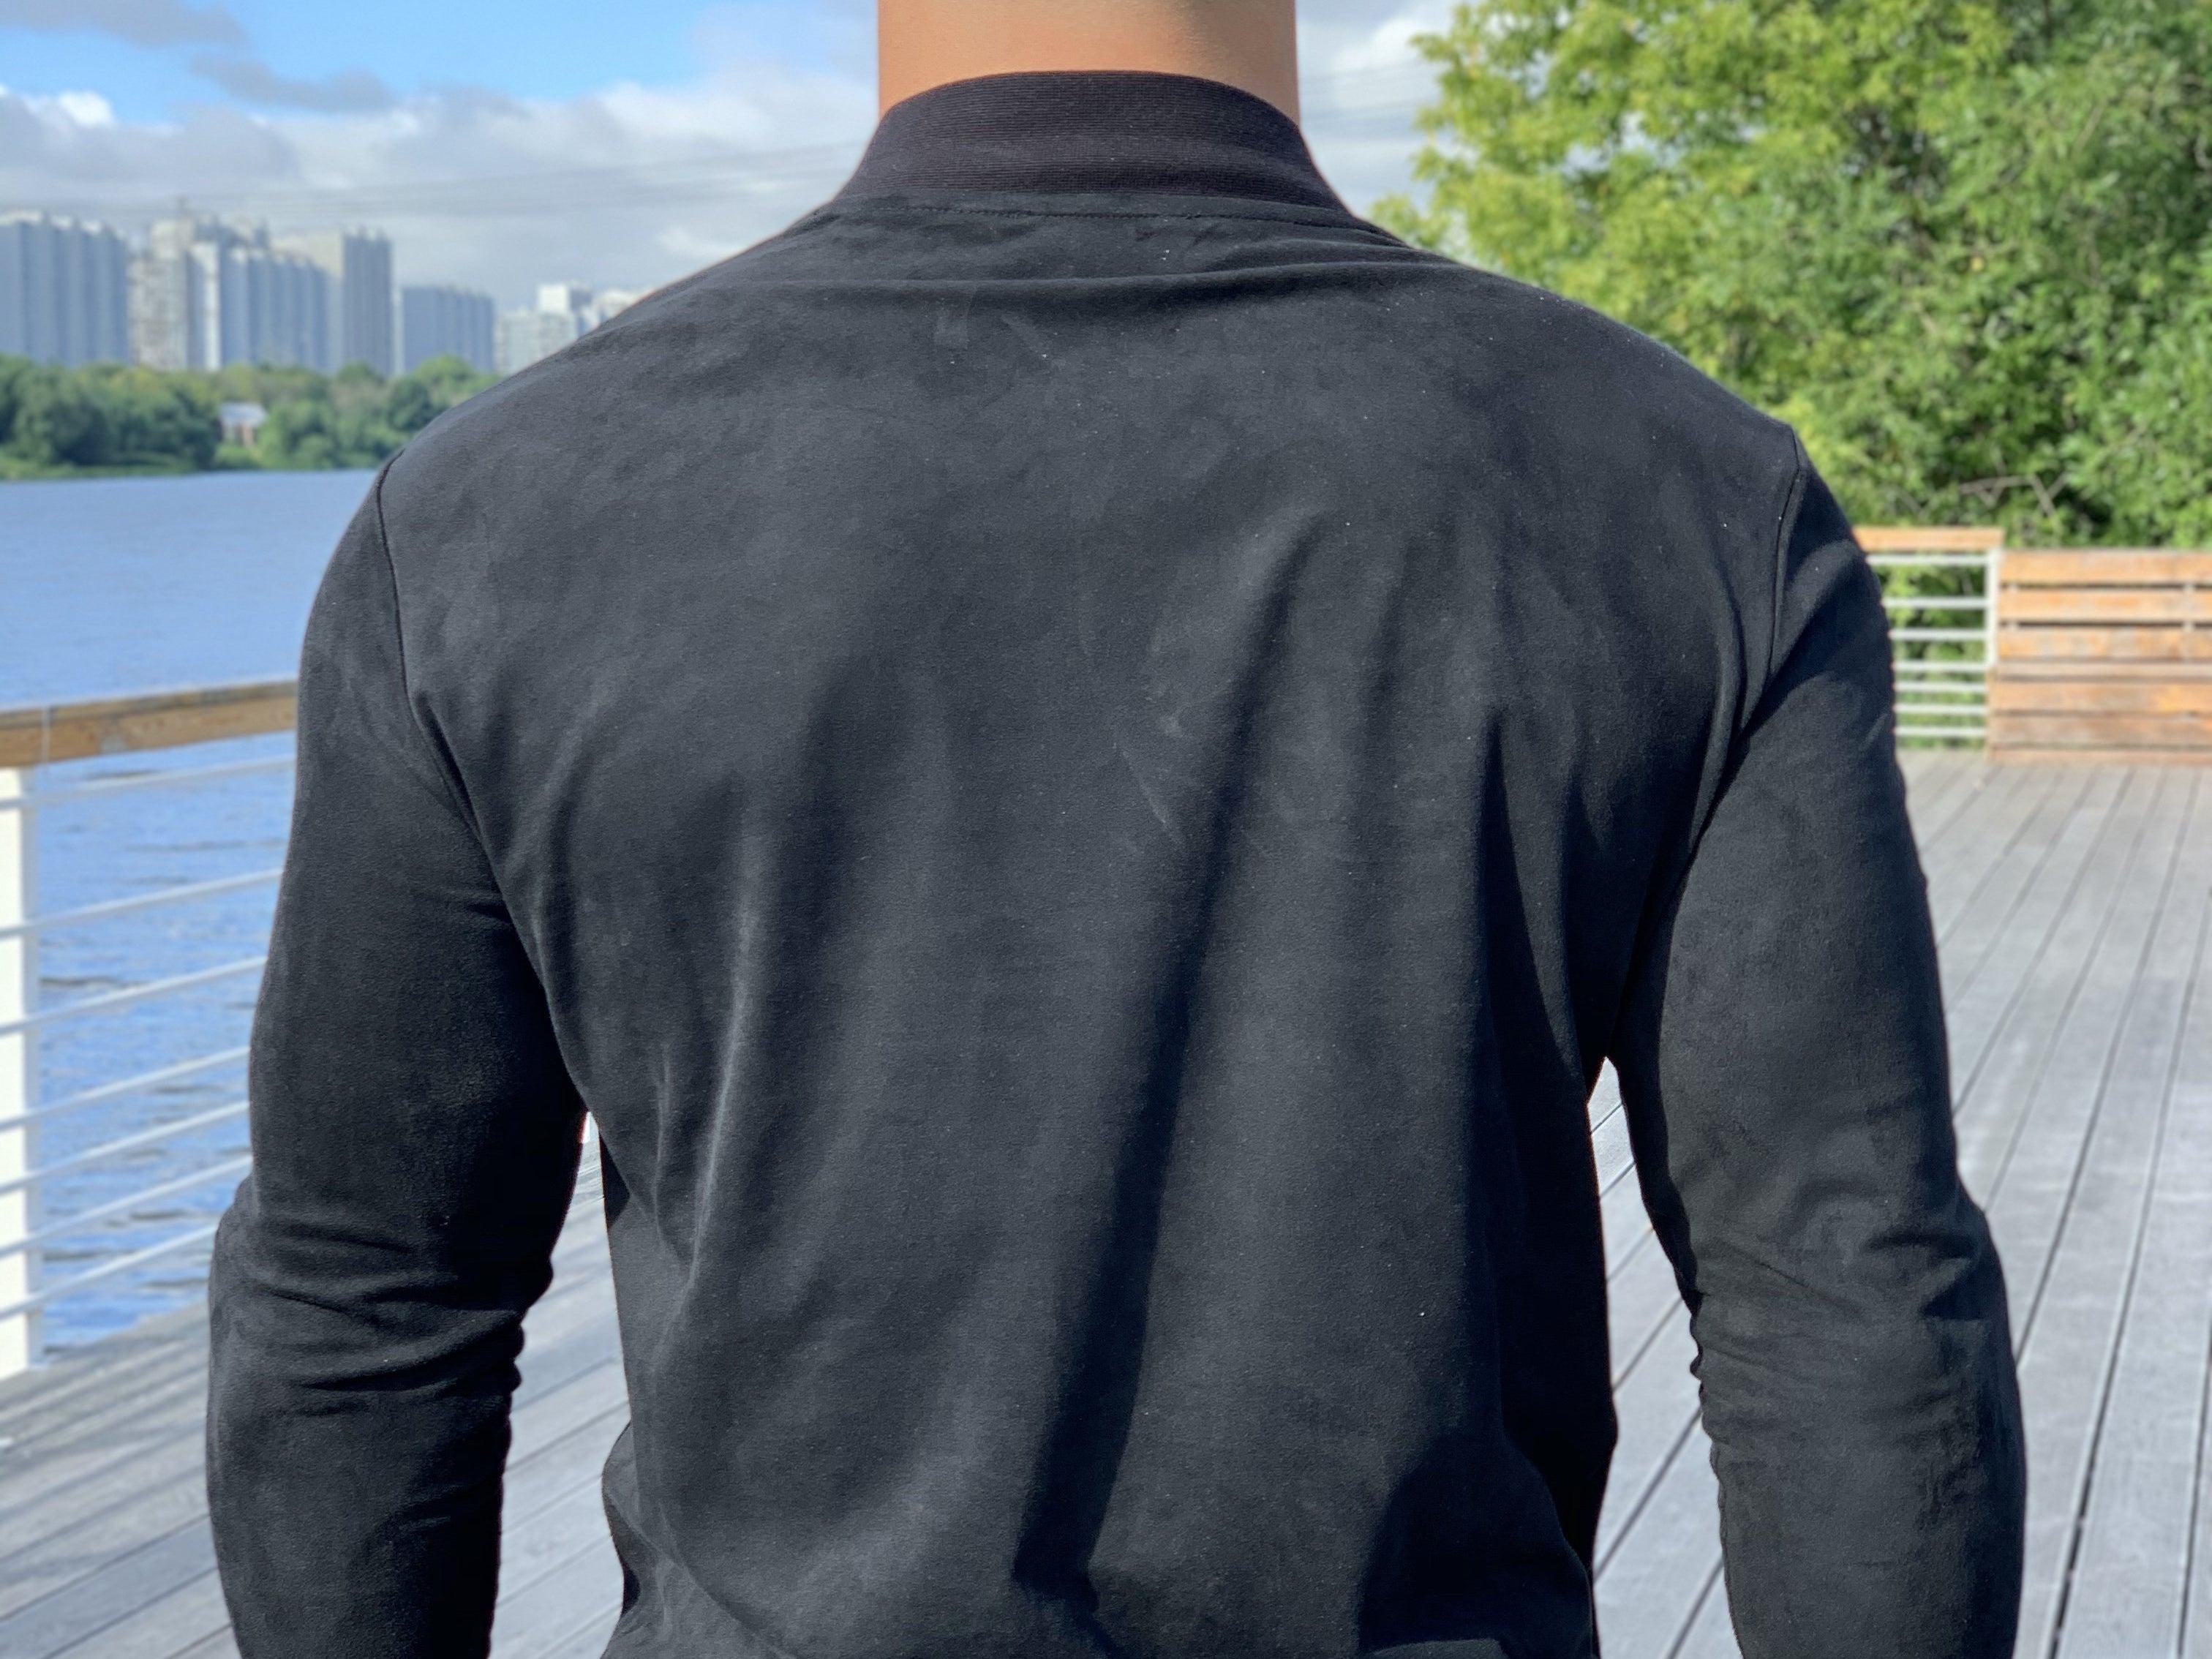 Alpha Male - Black Long Sleeve Sweatshirt for Men (PRE-ORDER DISPATCH DATE 25 SEPTEMBER) - Sarman Fashion - Wholesale Clothing Fashion Brand for Men from Canada